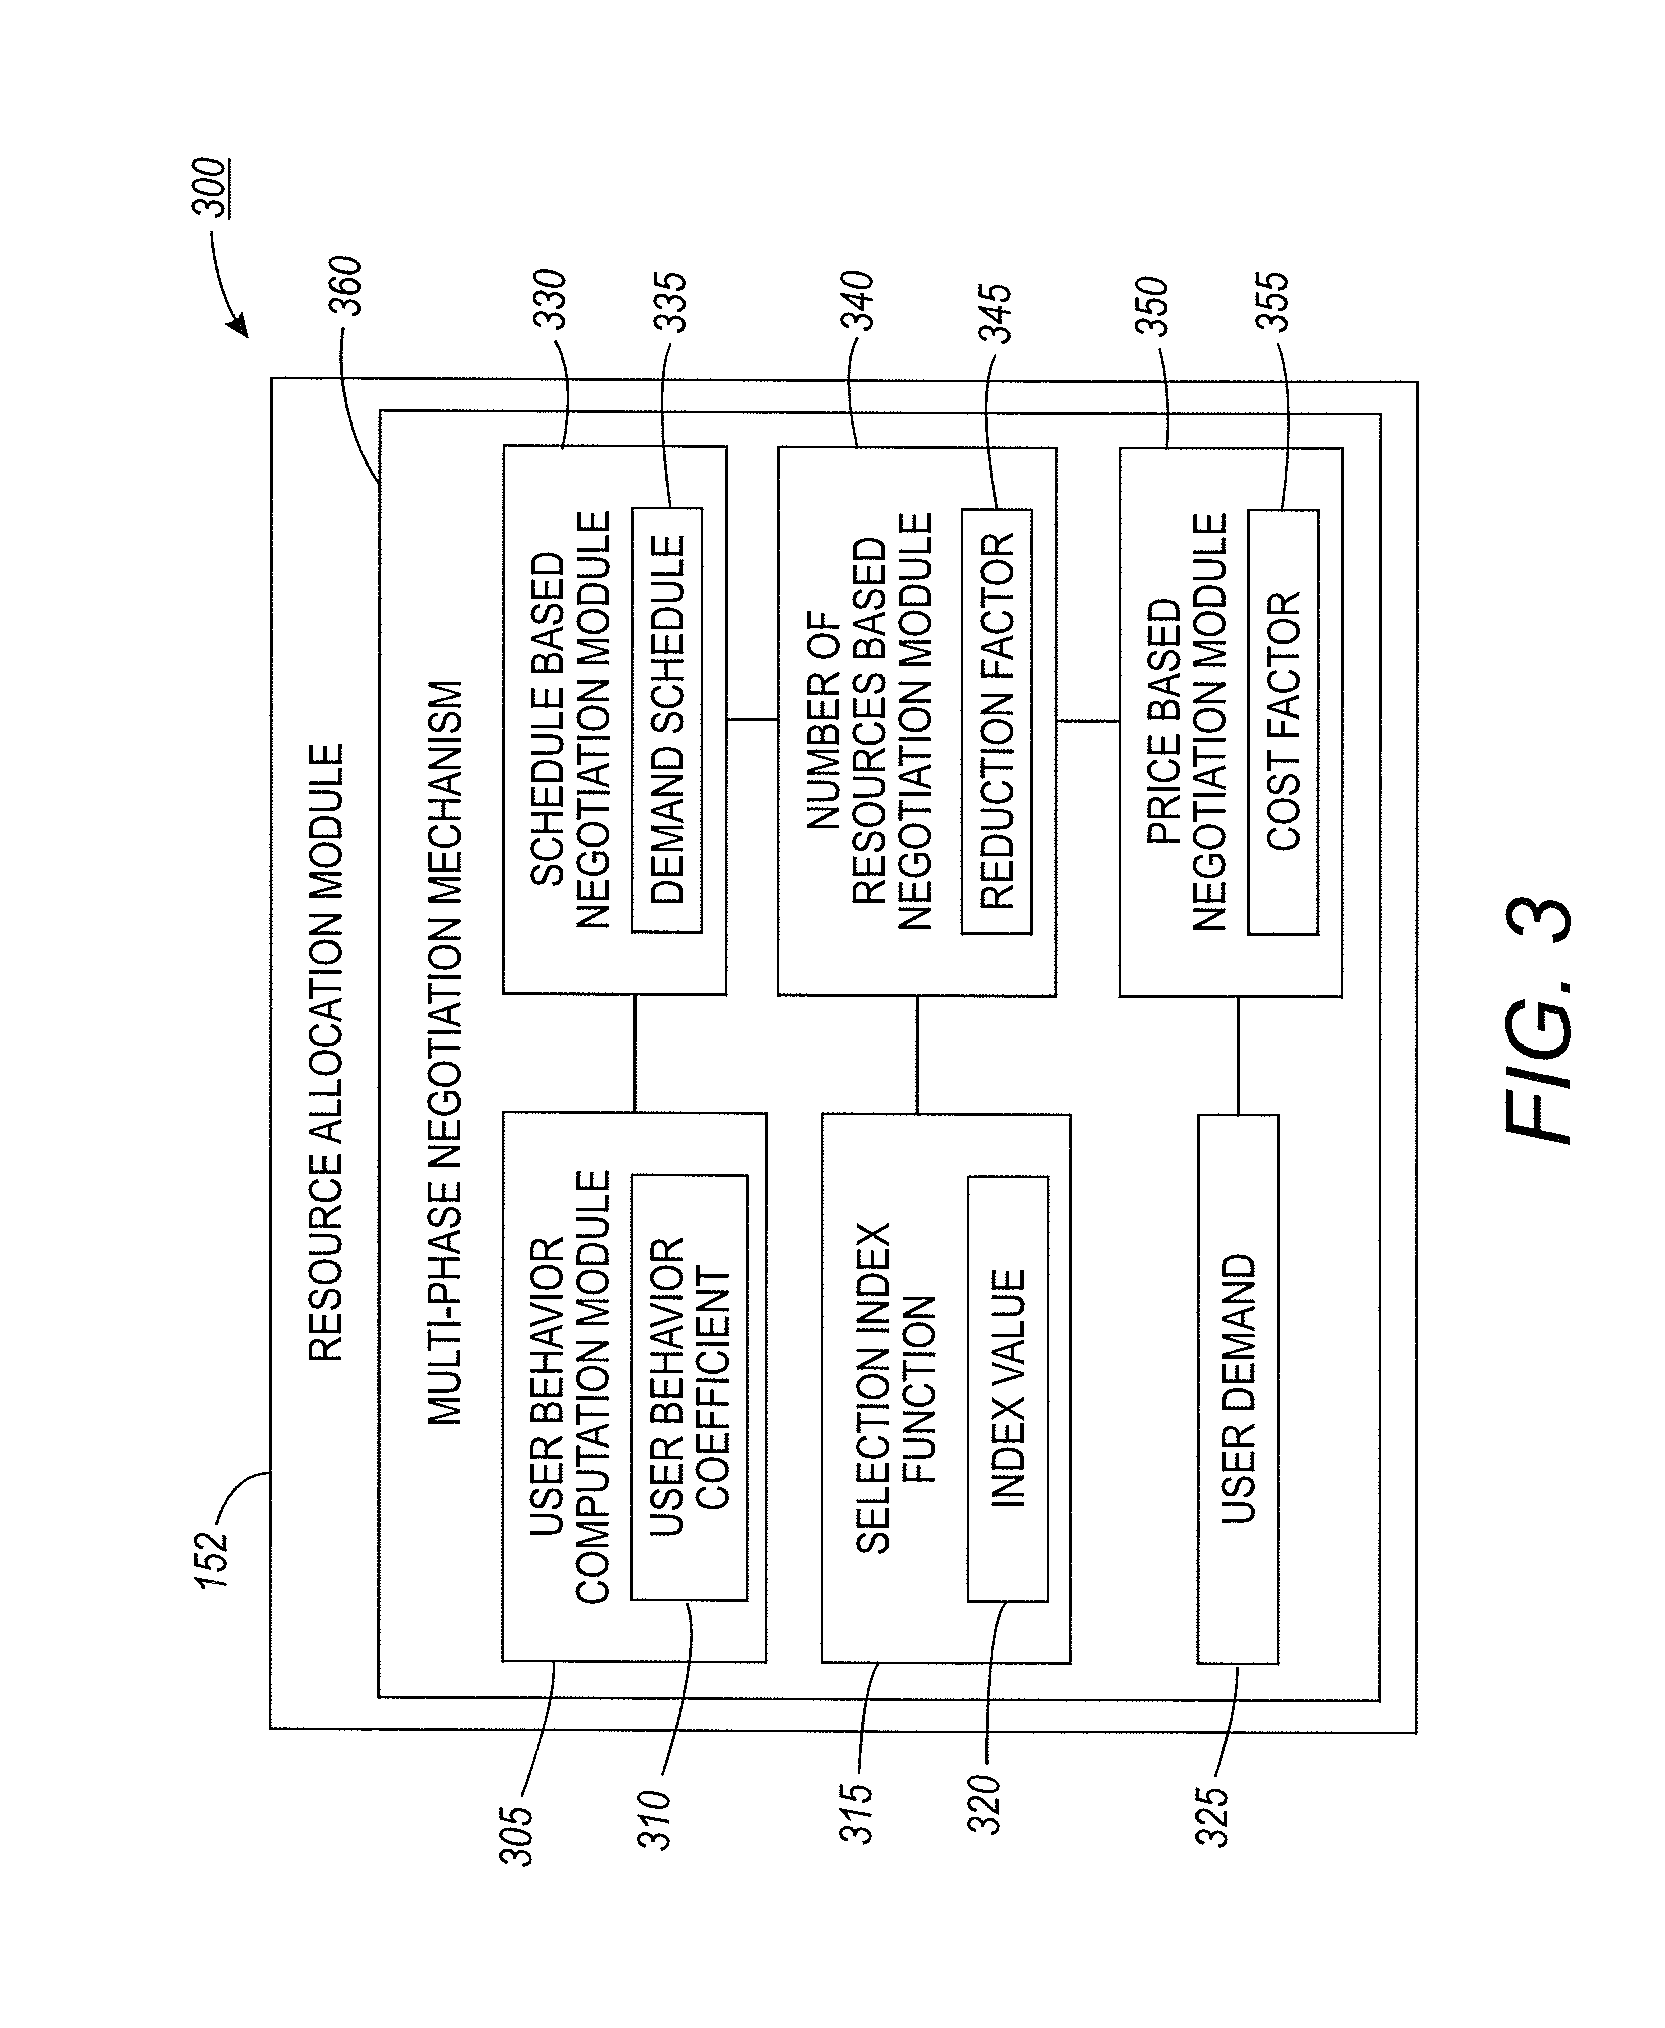 Method and system for the dynamic allocation of resources based on a multi-phase negotiation mechanism